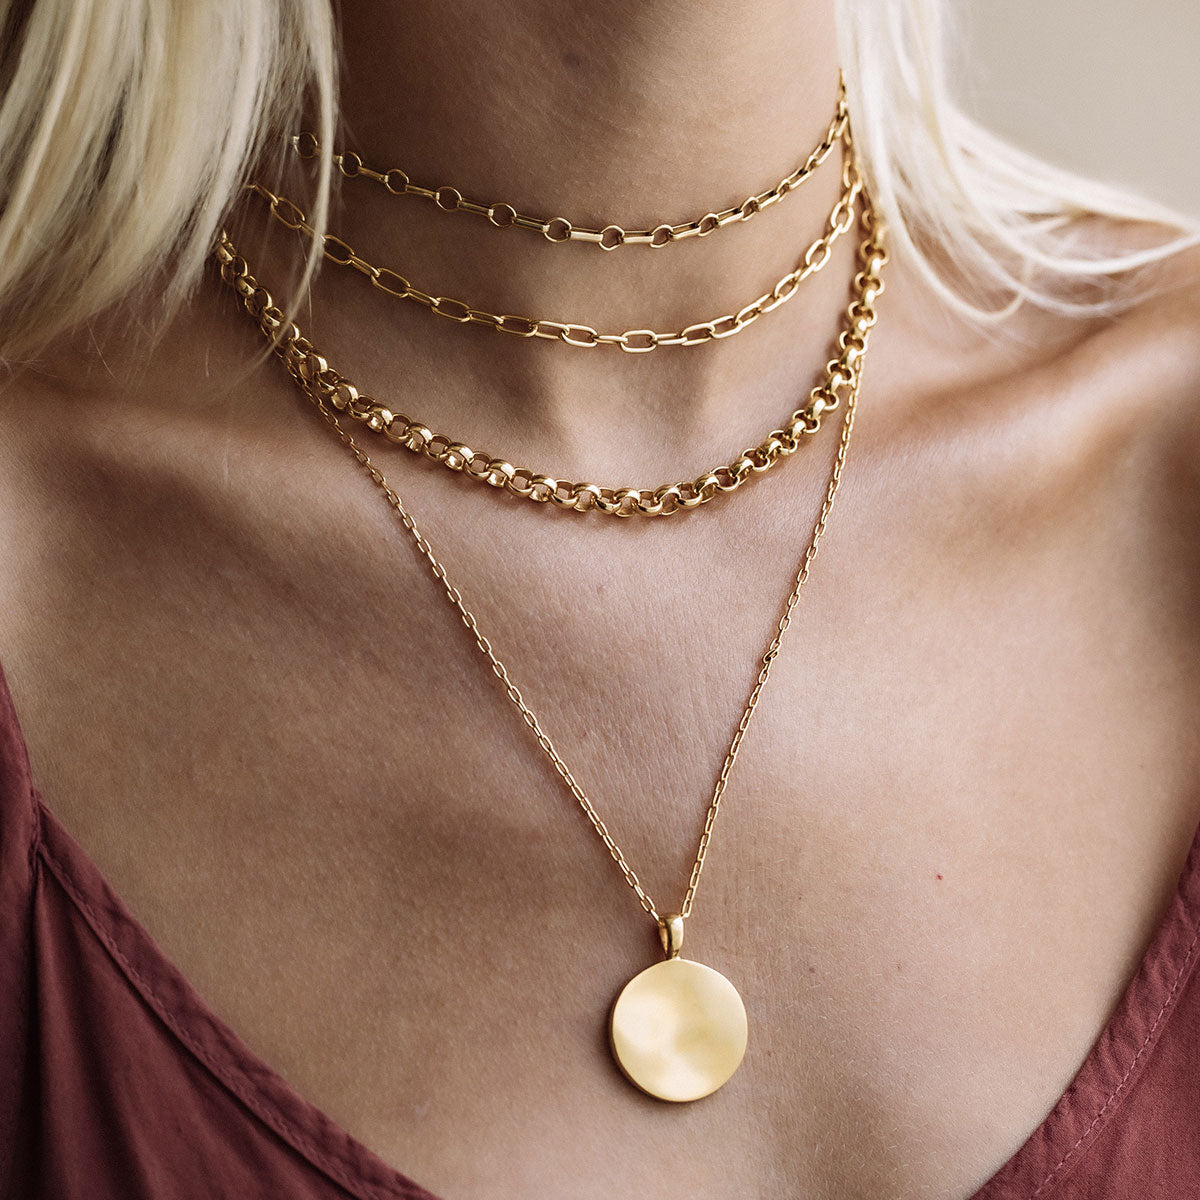 Rolo Chain Collar Necklace | Handmade Jewelry | Anna Beck Jewelry ...